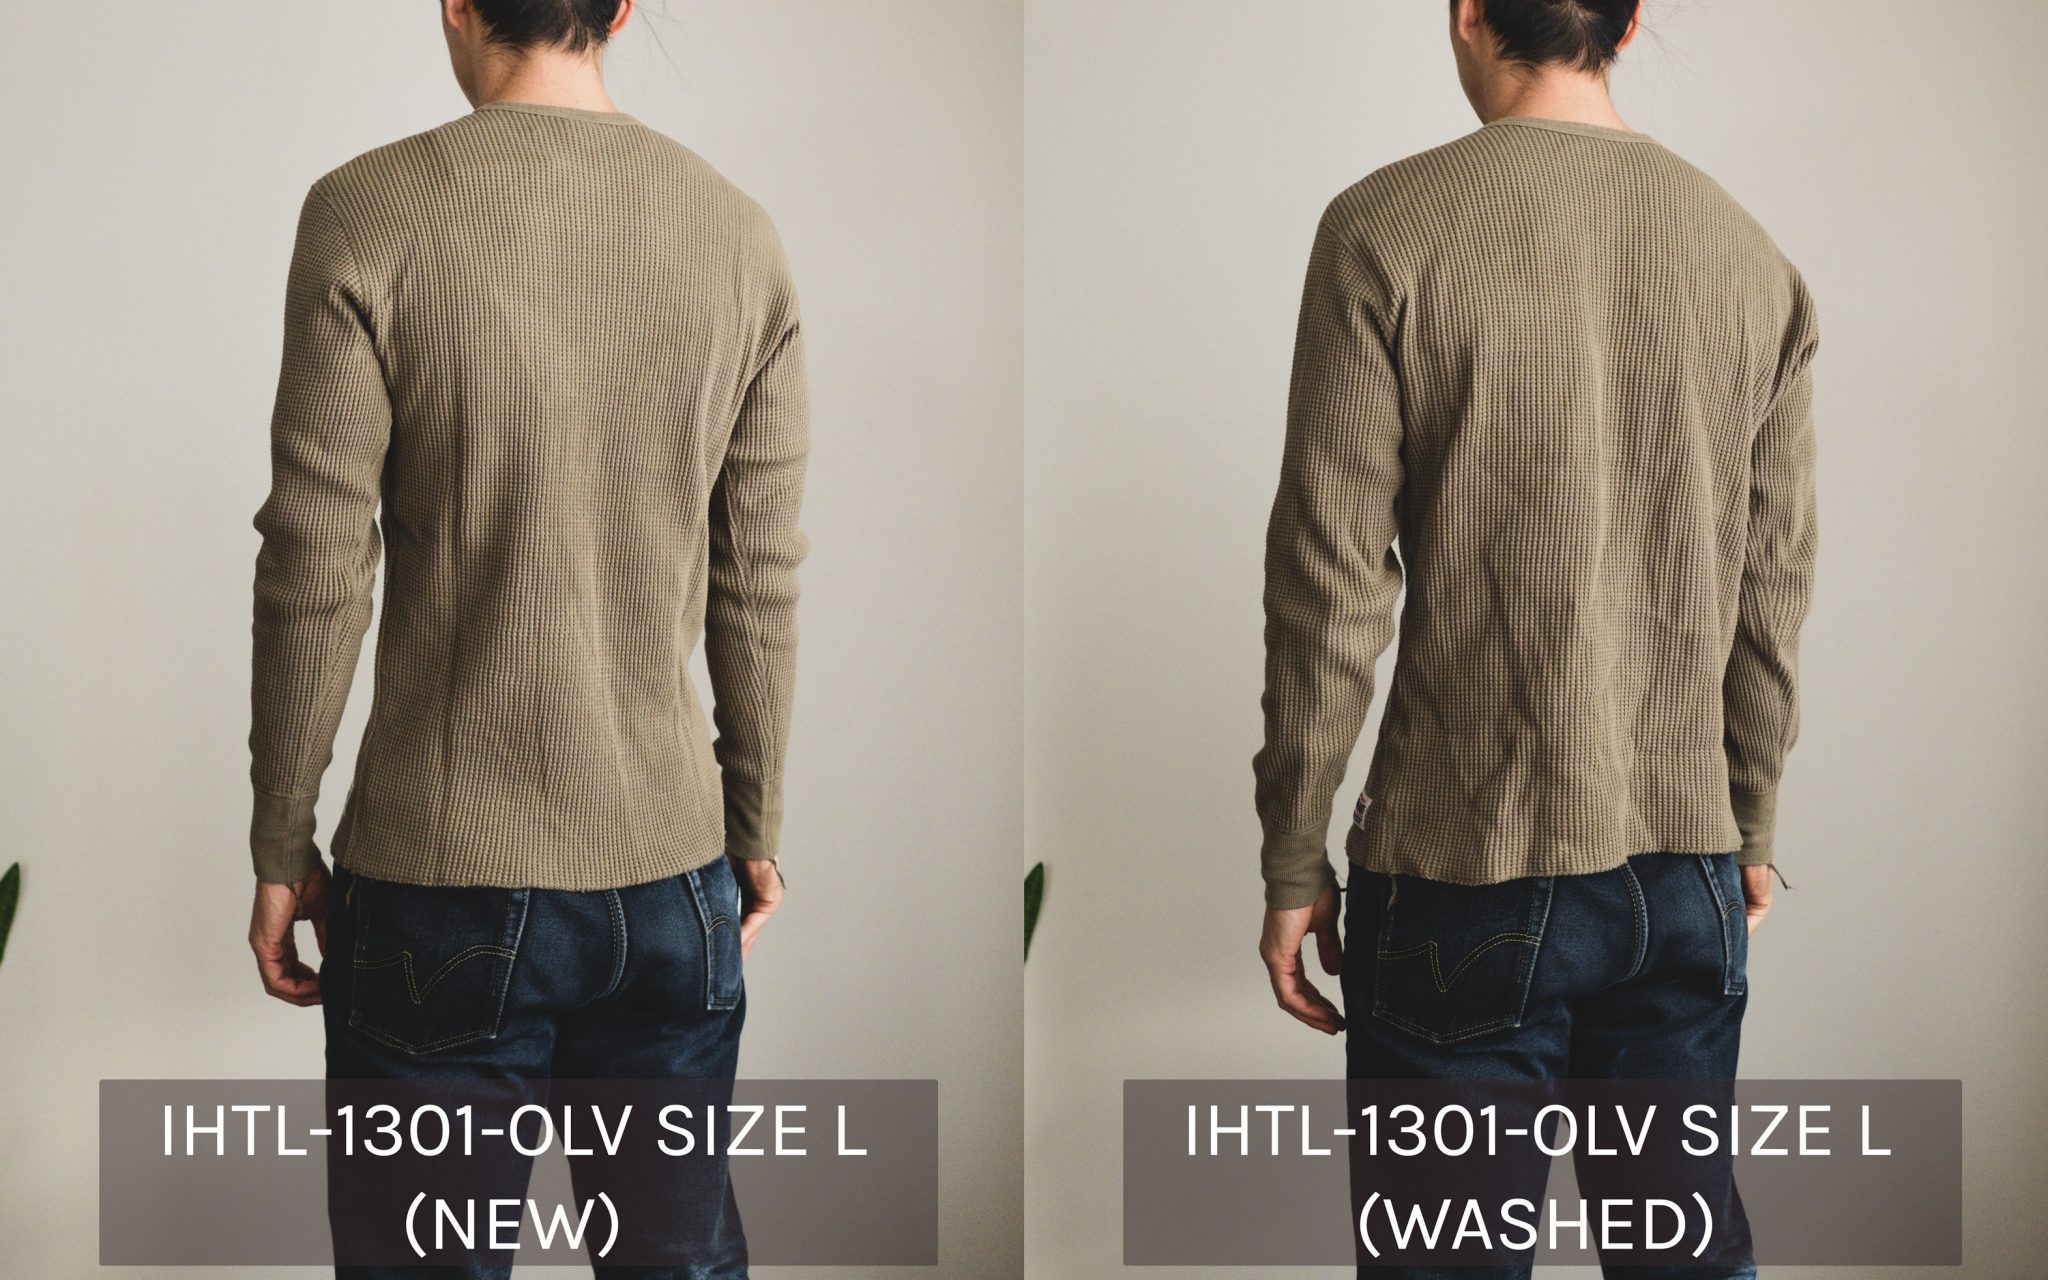 Iron Heart IHTL-1301-OLV Side-by-side comparison back